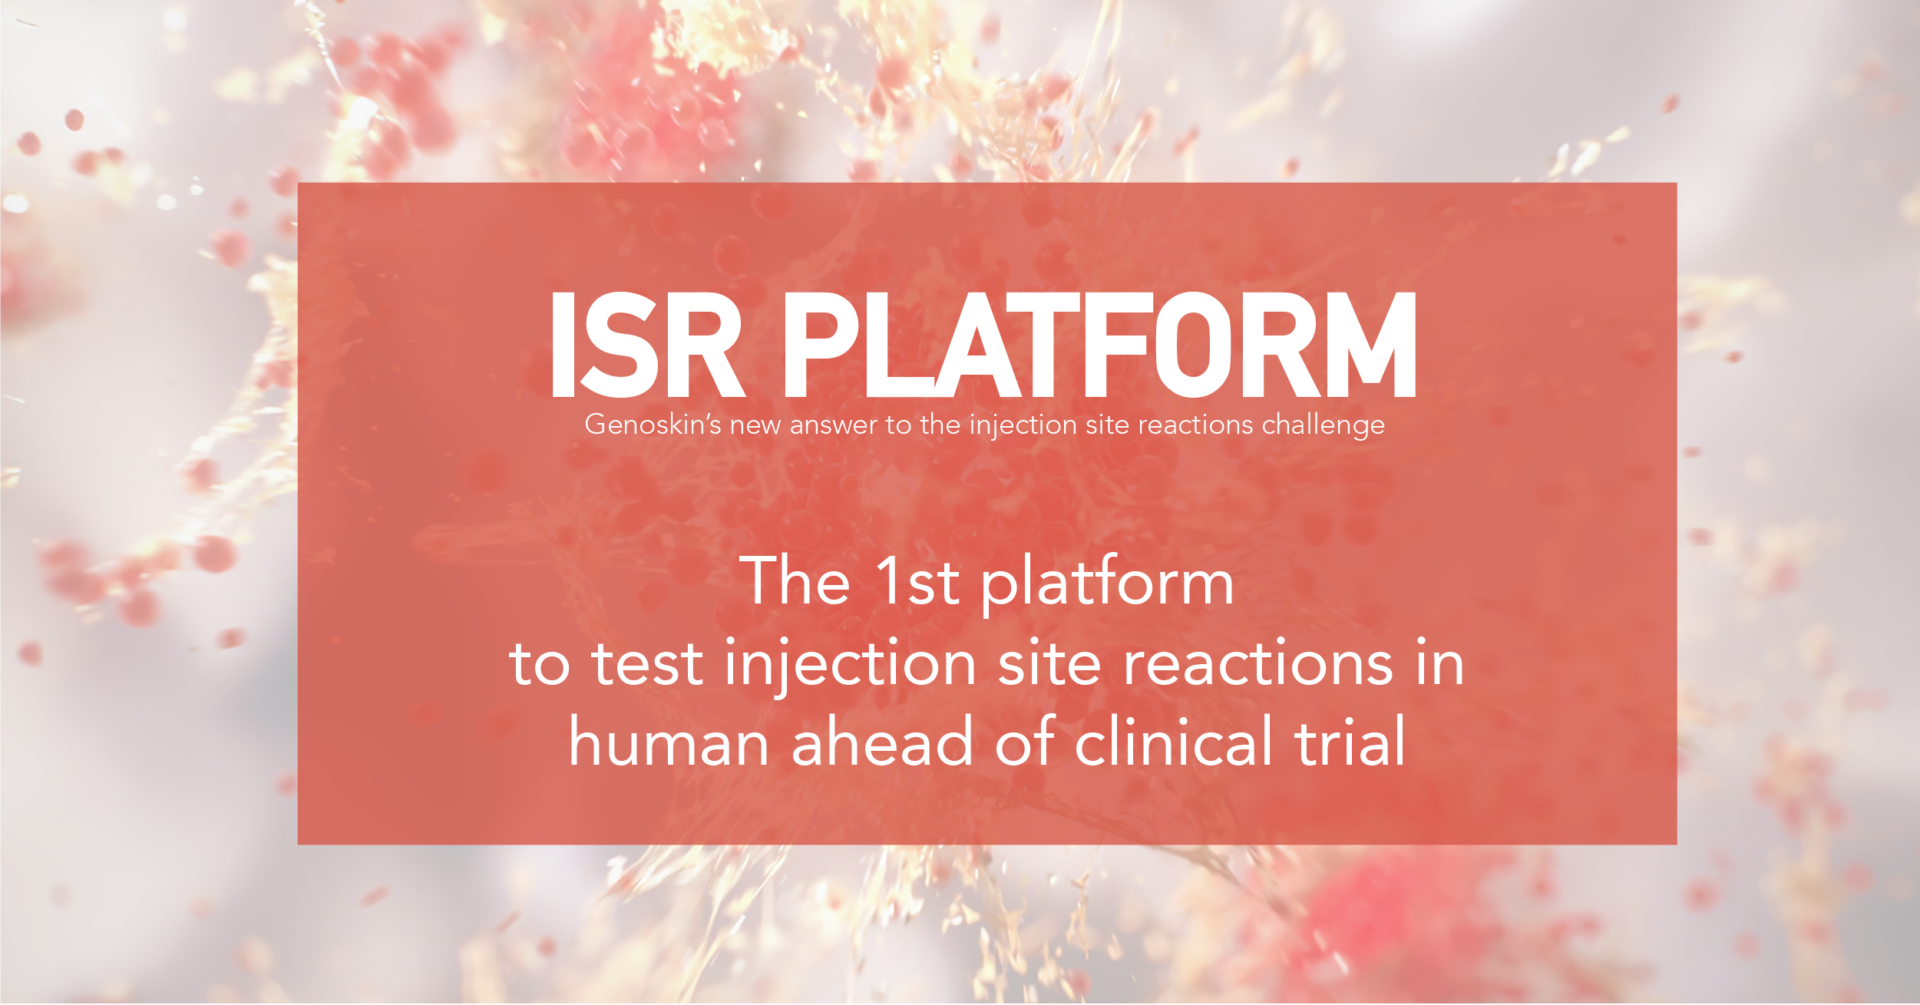 Genoskin launches ISR platform, first platform to test injections sites reactions ahead of clinical trials